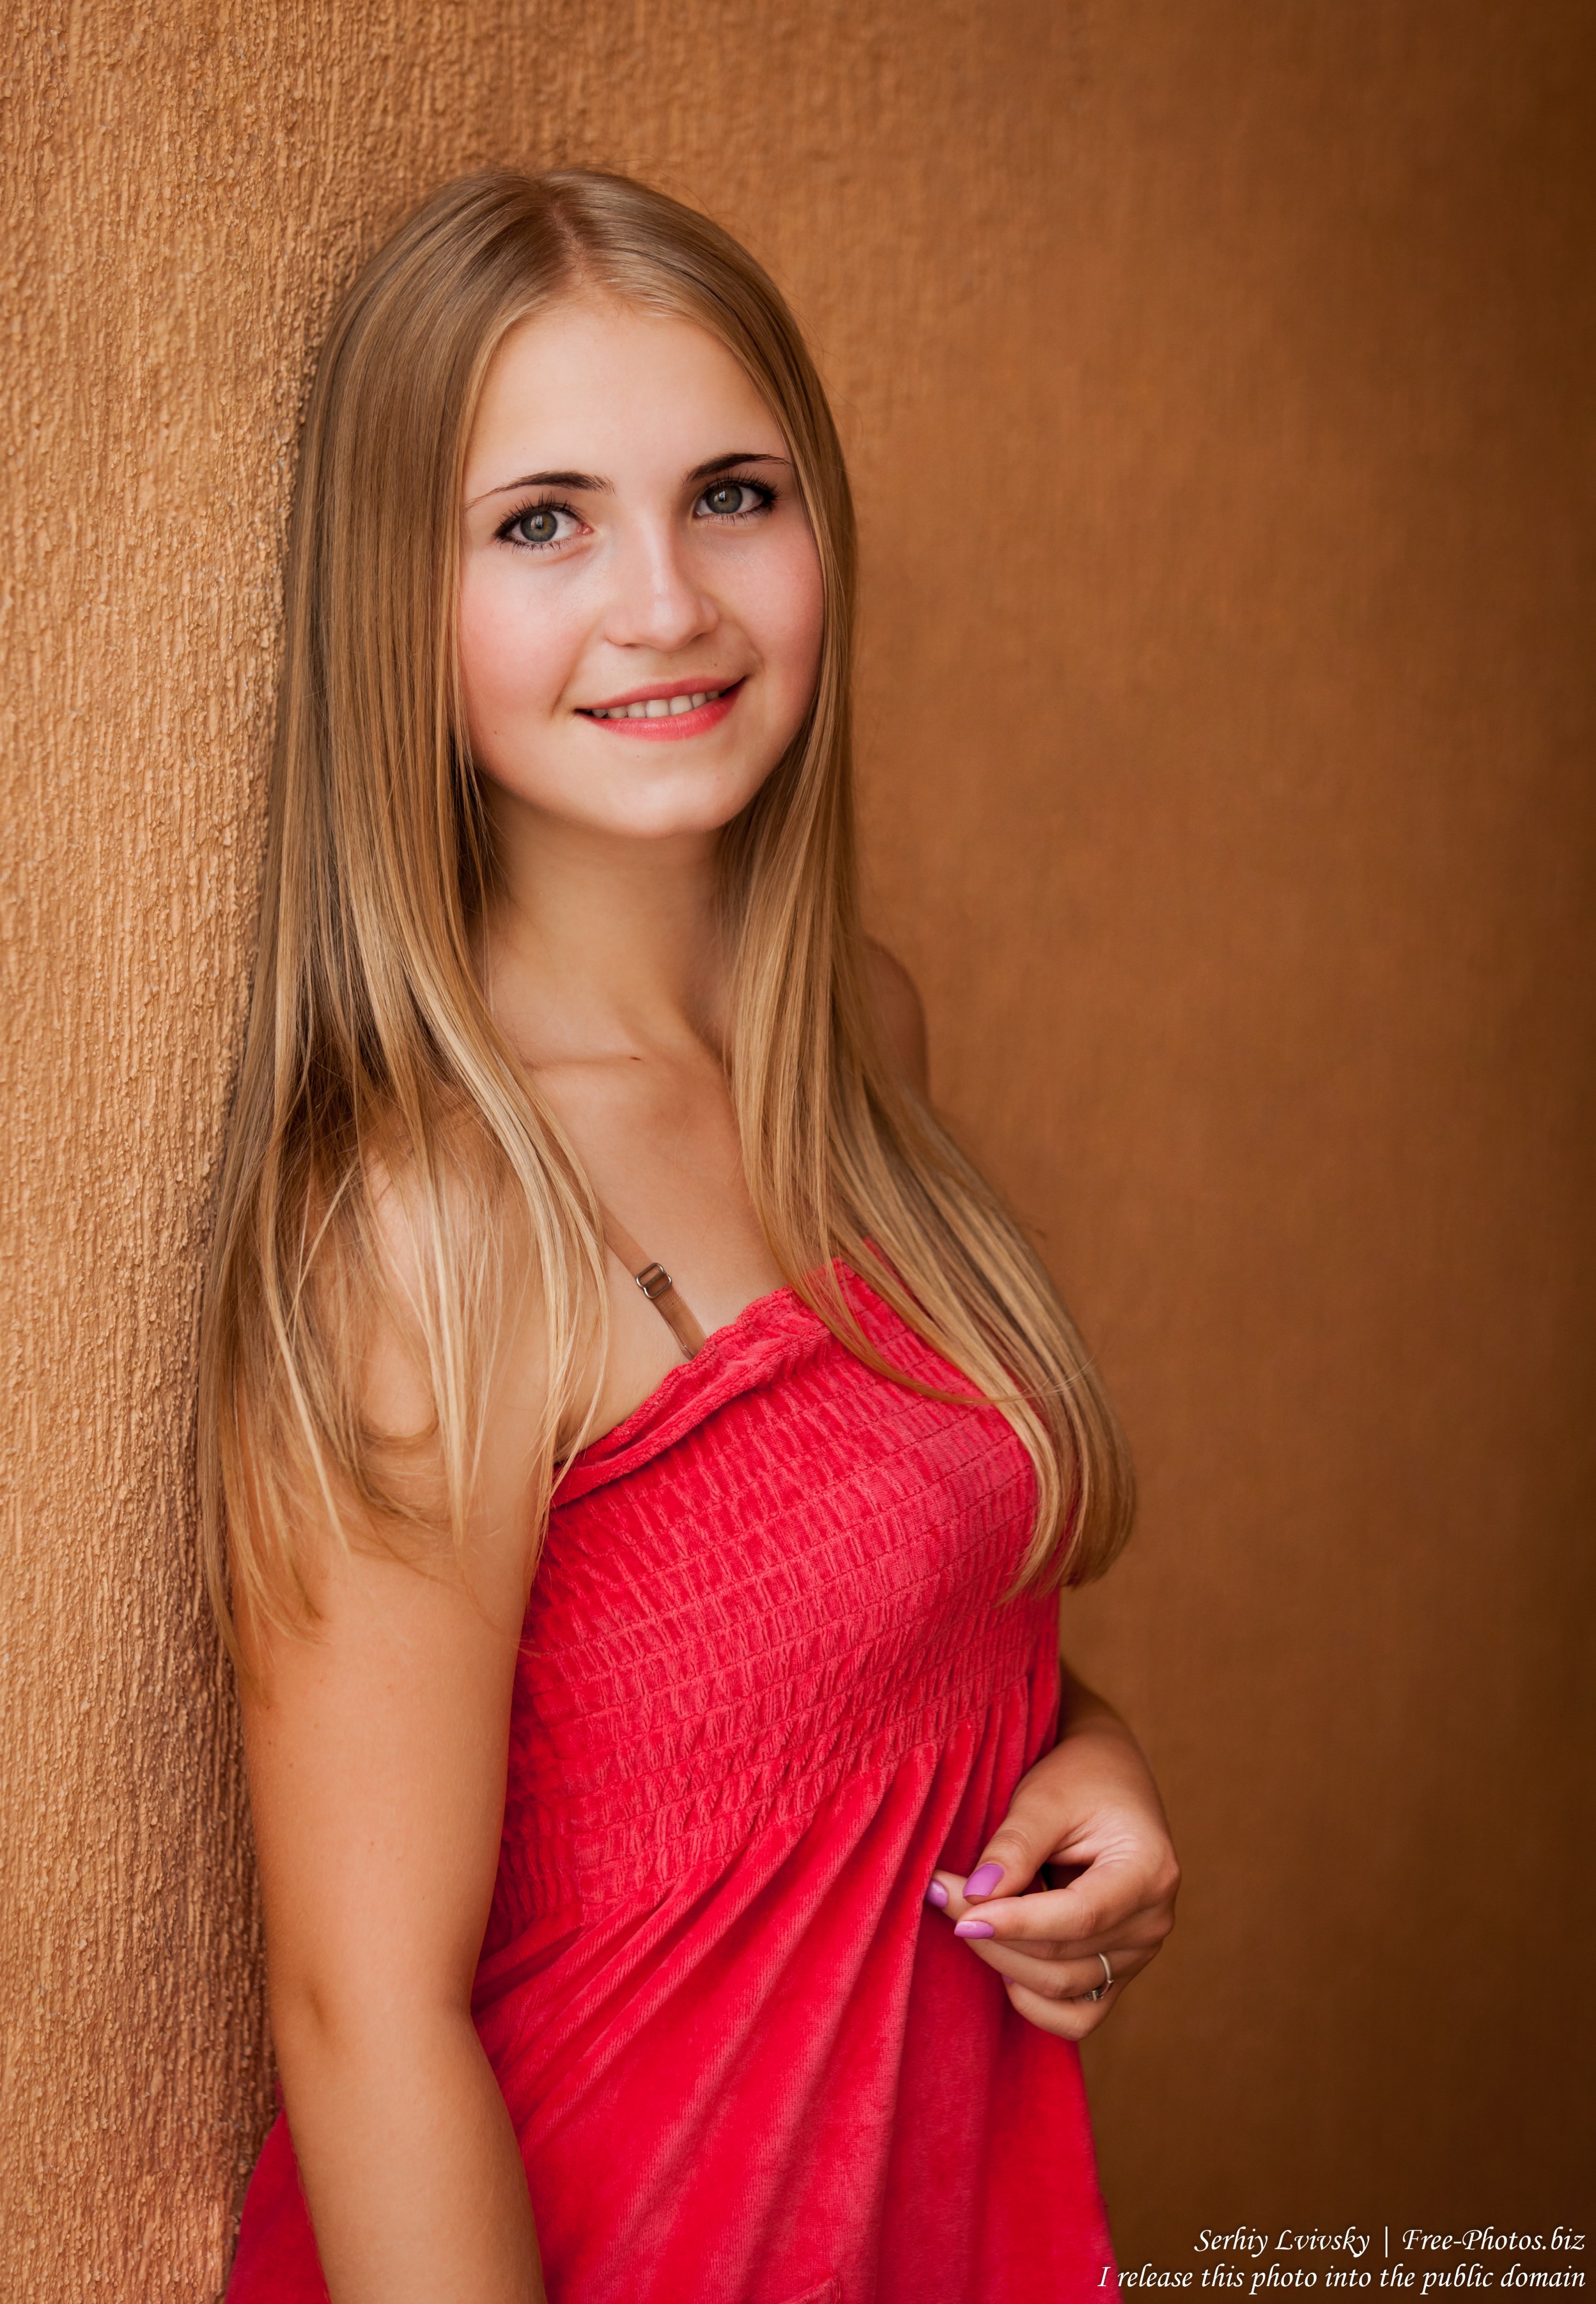 Photo Of A Catholic 19 Year Old Natural Blond Girl Photographed In